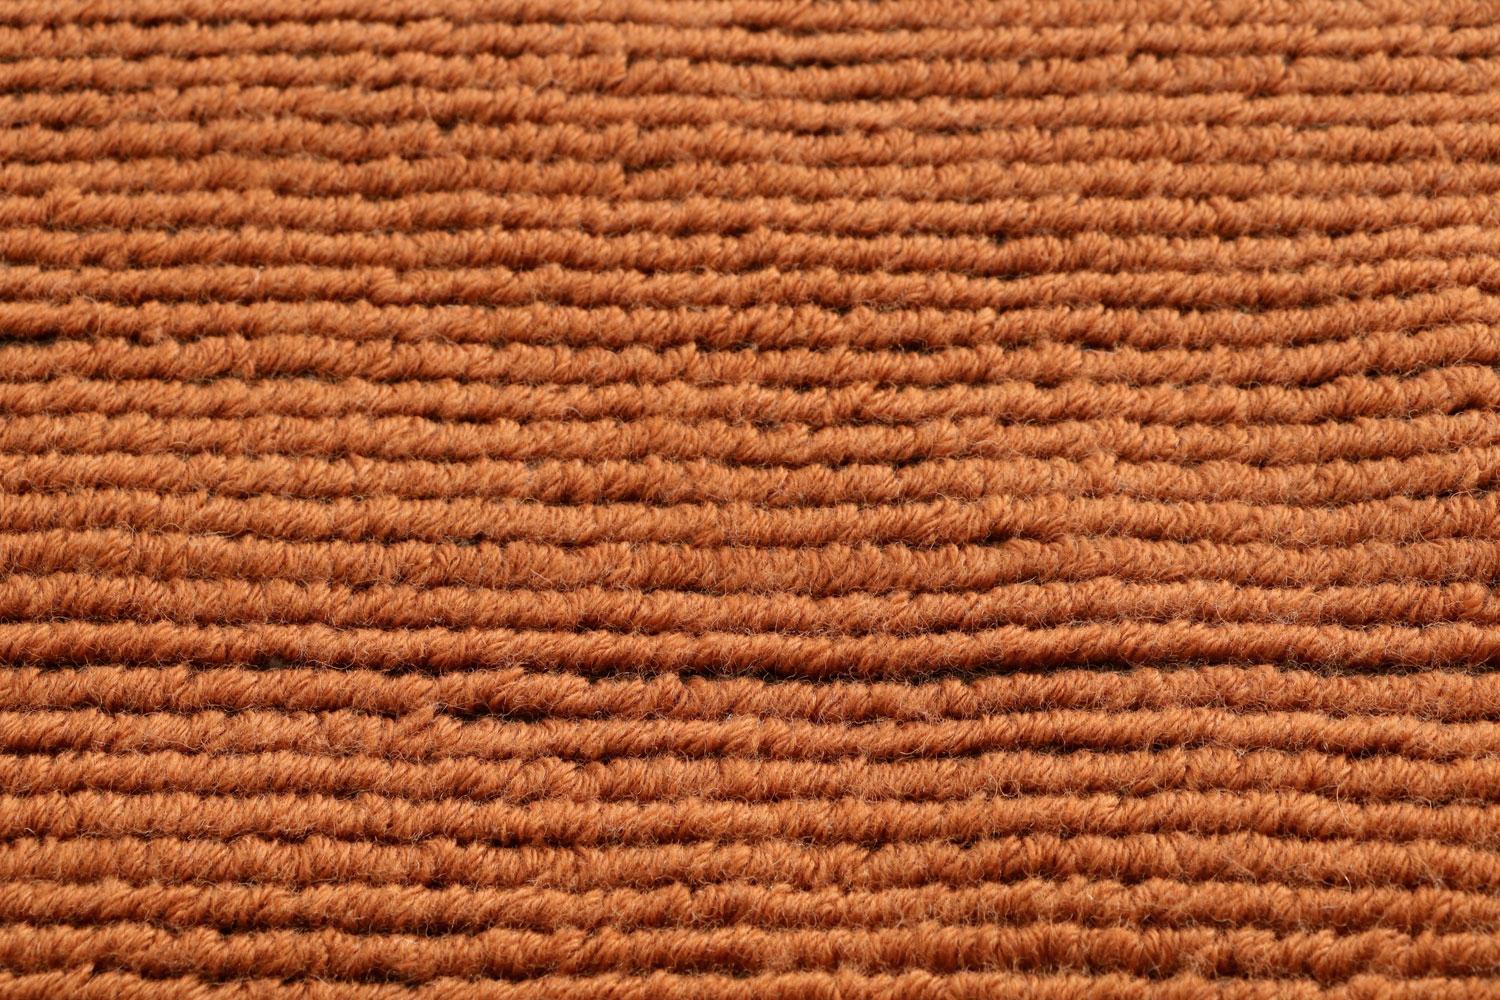 Indian Contemporary Soft Natural Orange Pure Wool Rug by Deanna Comellini 170x240 cm For Sale